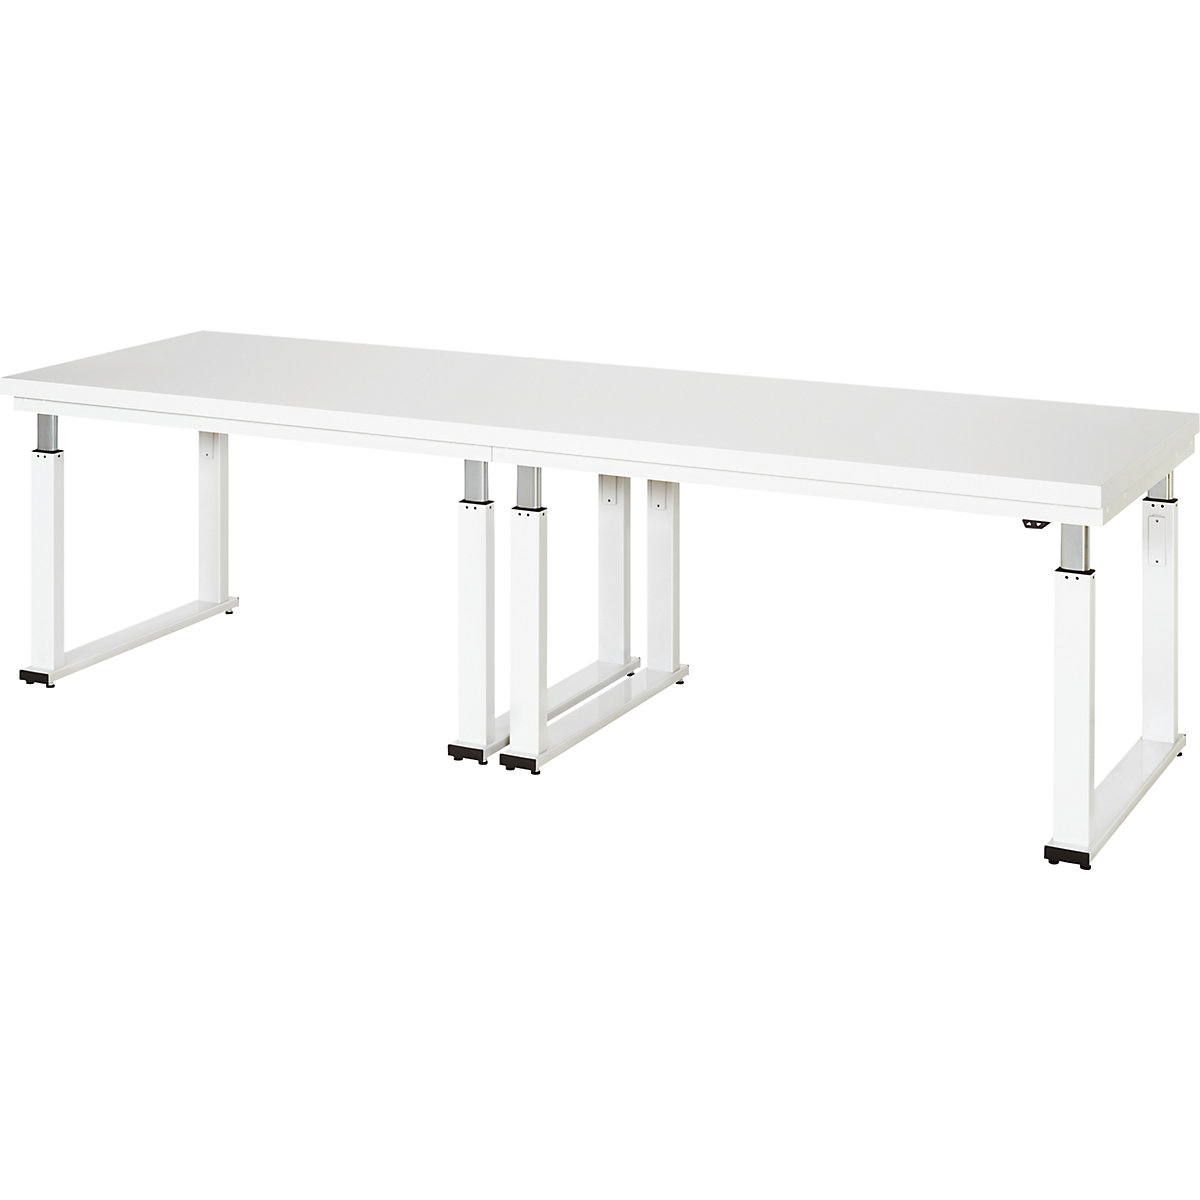 Work table, electric height adjustment – RAU, hardened laminate worktop, max. load 600 kg, WxD 3000 x 900 mm-13